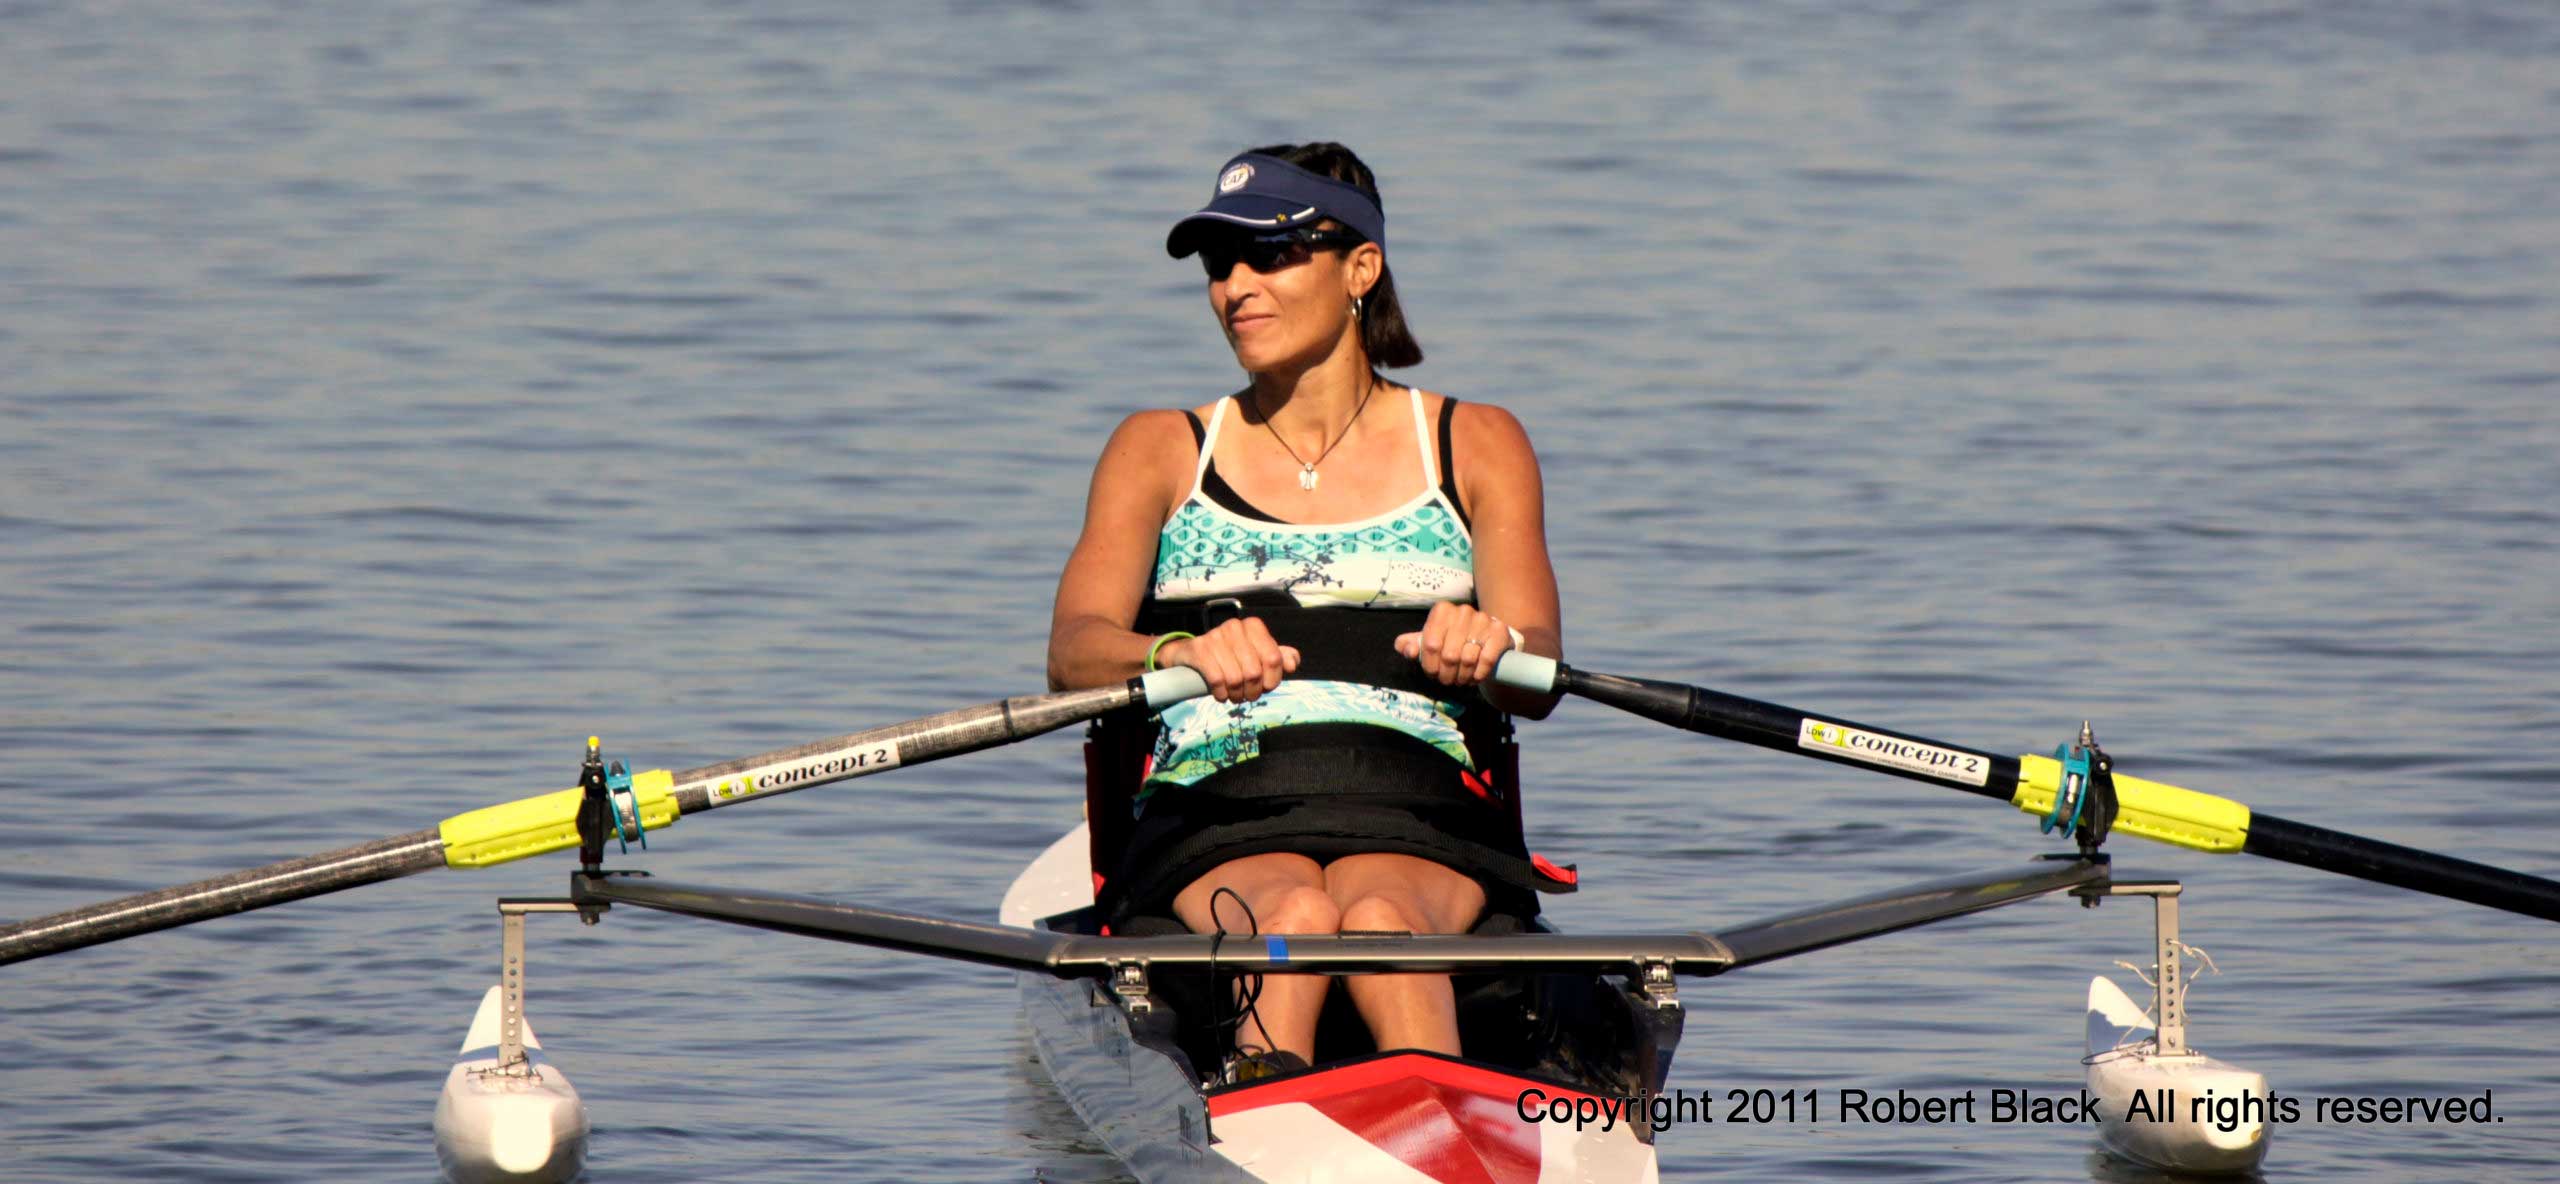 single female athlete rowing during US rowing trials.